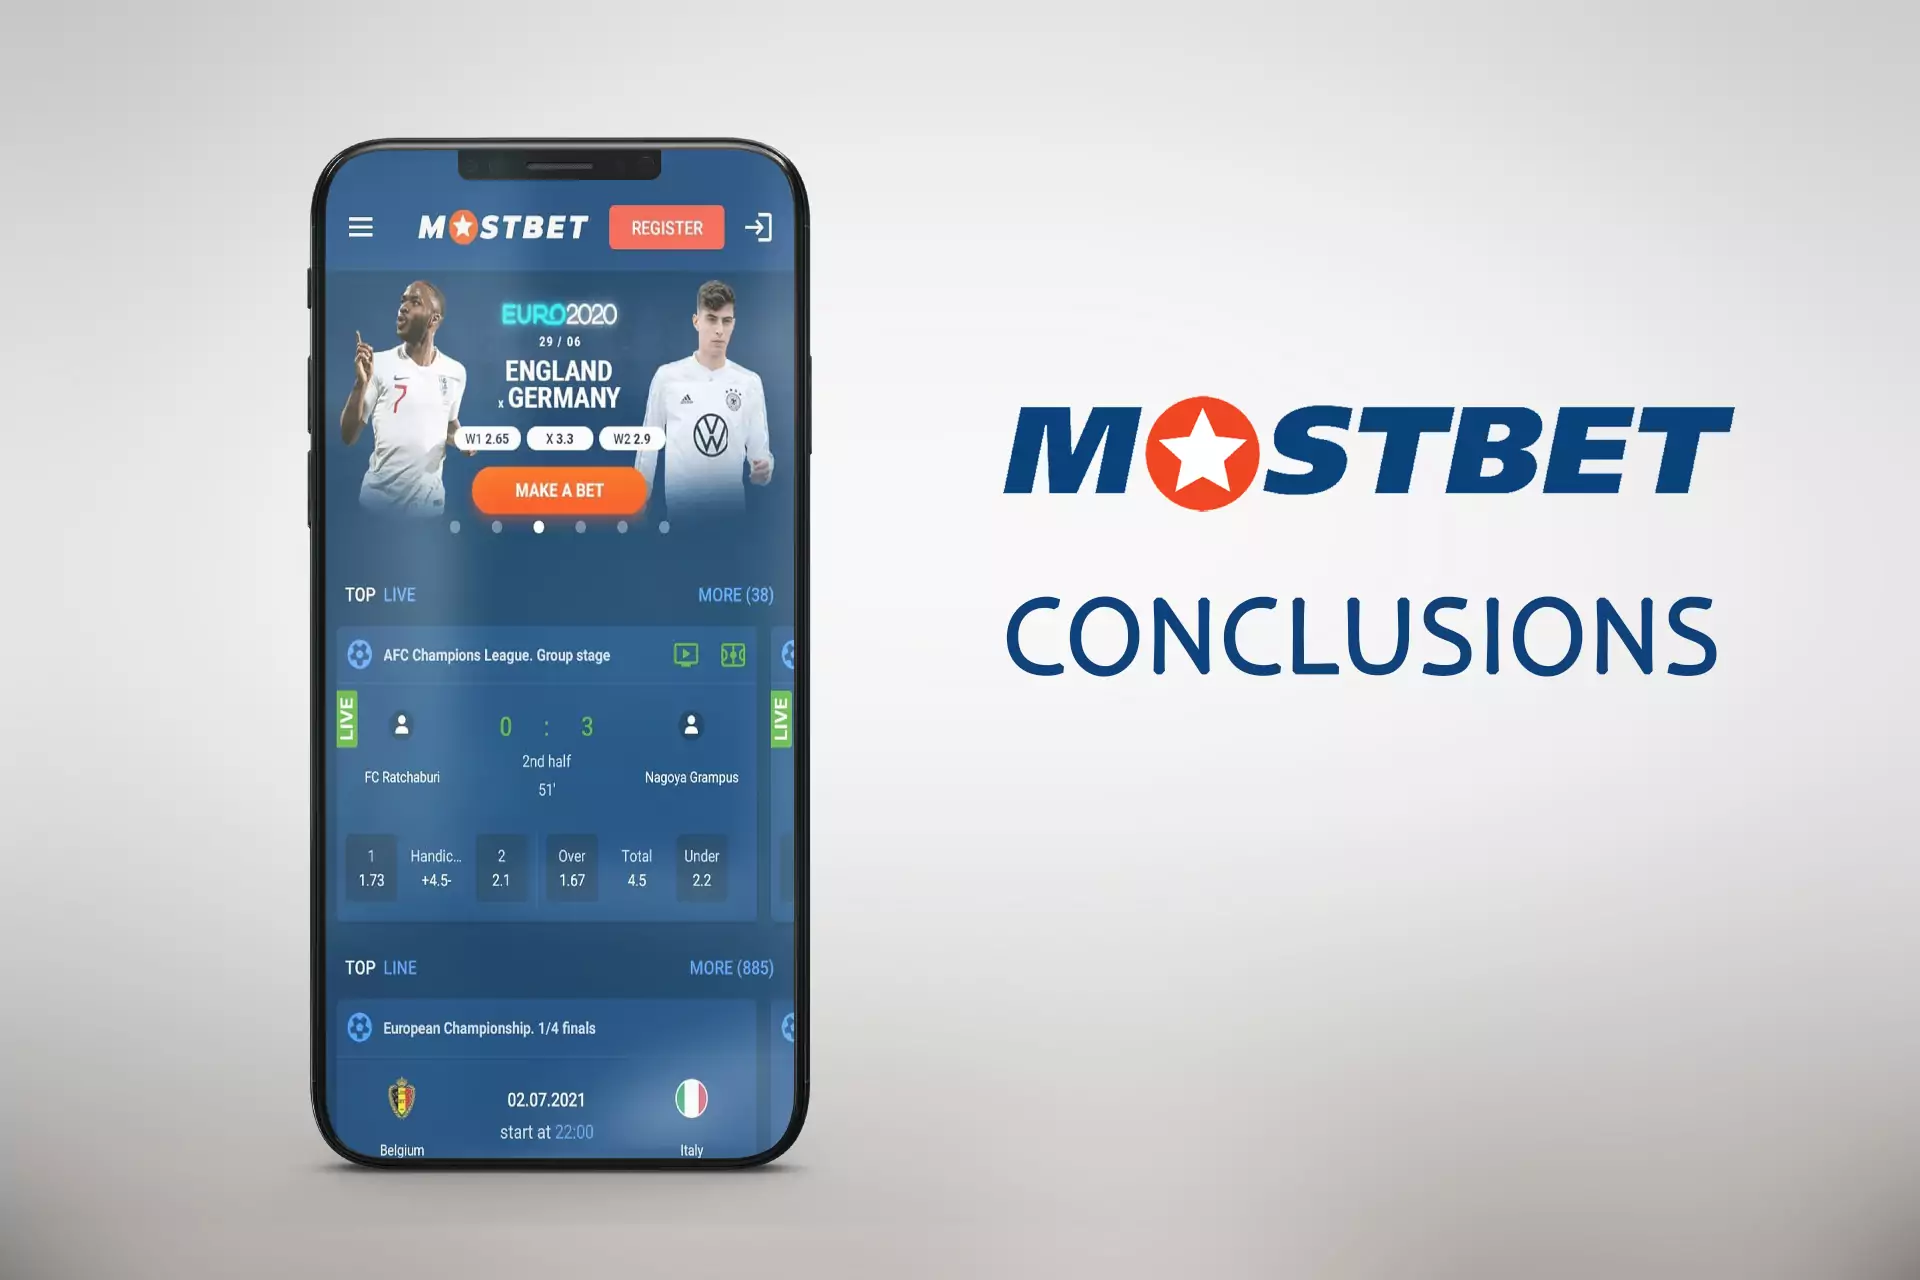 Read about the main benefits of the Mostbet app in our conclusions.